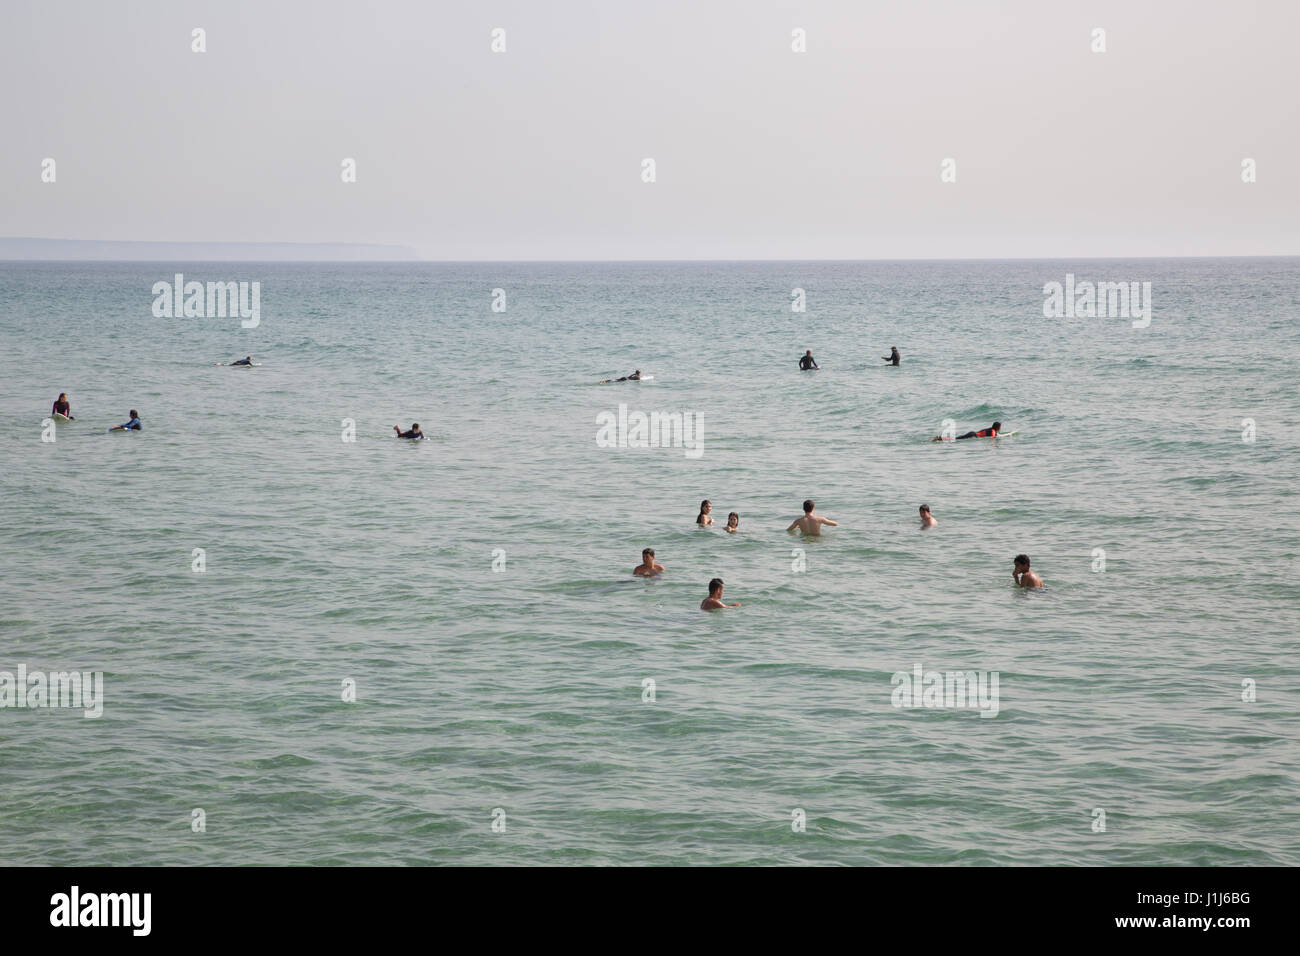 People swimming in the sea at Cascais beach, Lisbon, Portugal. Stock Photo